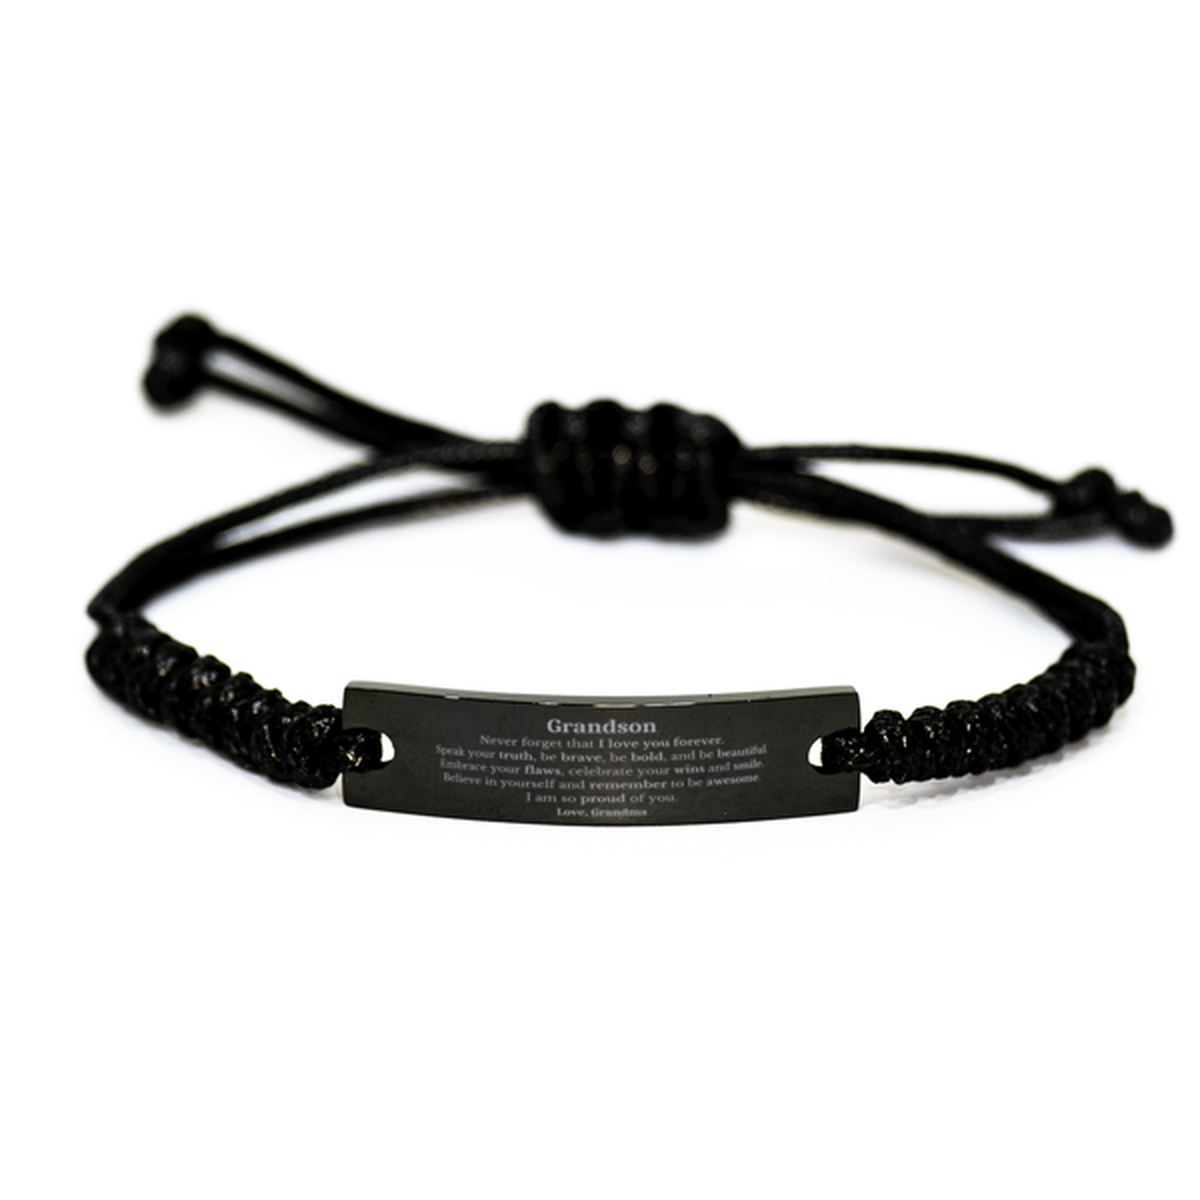 Grandson Black Rope Bracelet, Never forget that I love you forever, Inspirational Grandson Birthday Unique Gifts From Grandma